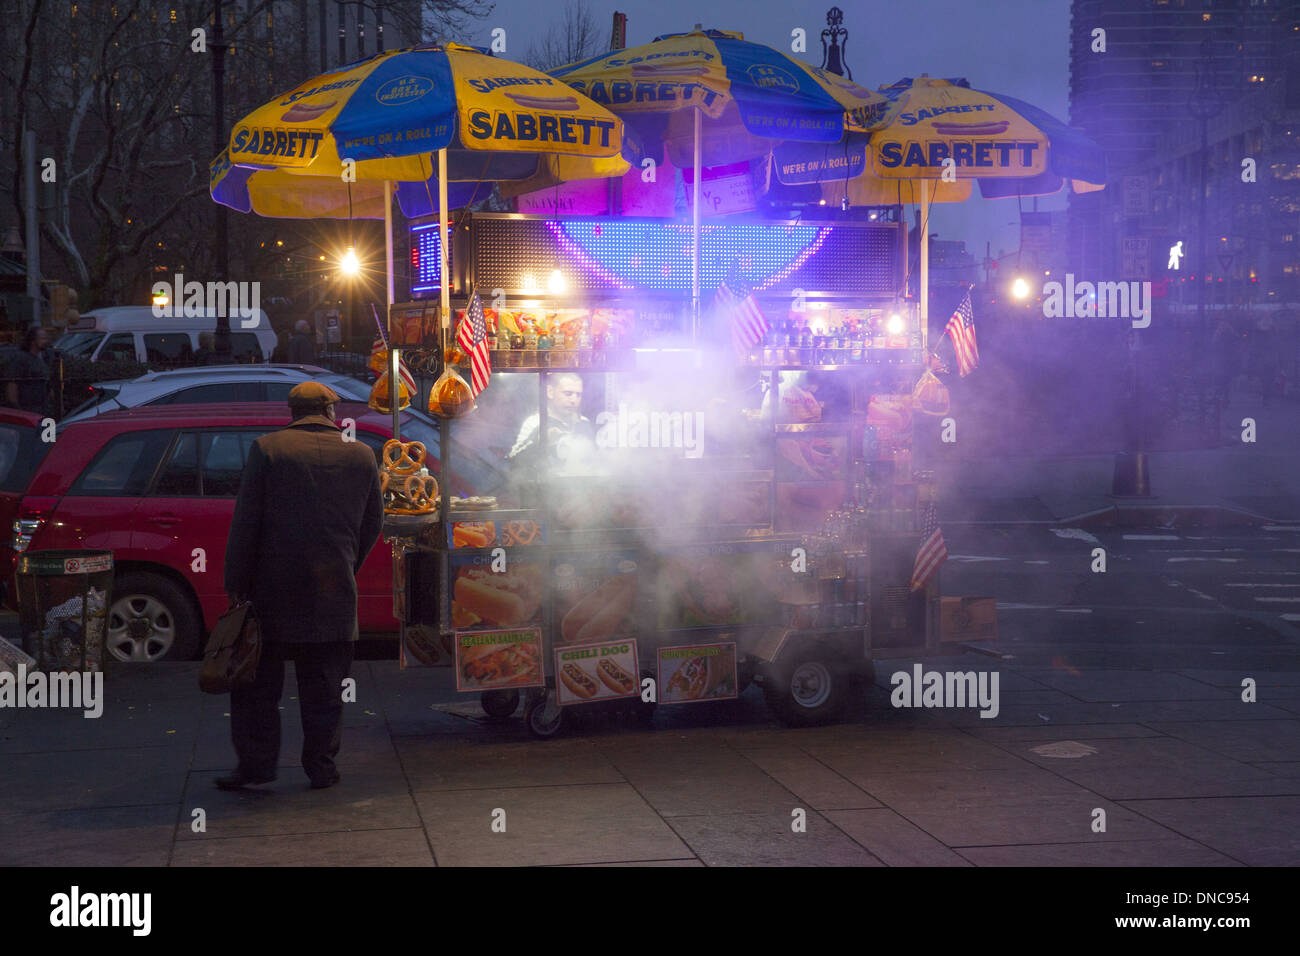 Hot dog vendor smokes up the area grilling hot dogs near City Hall Park at dusk in Manhattan, NYC. Stock Photo